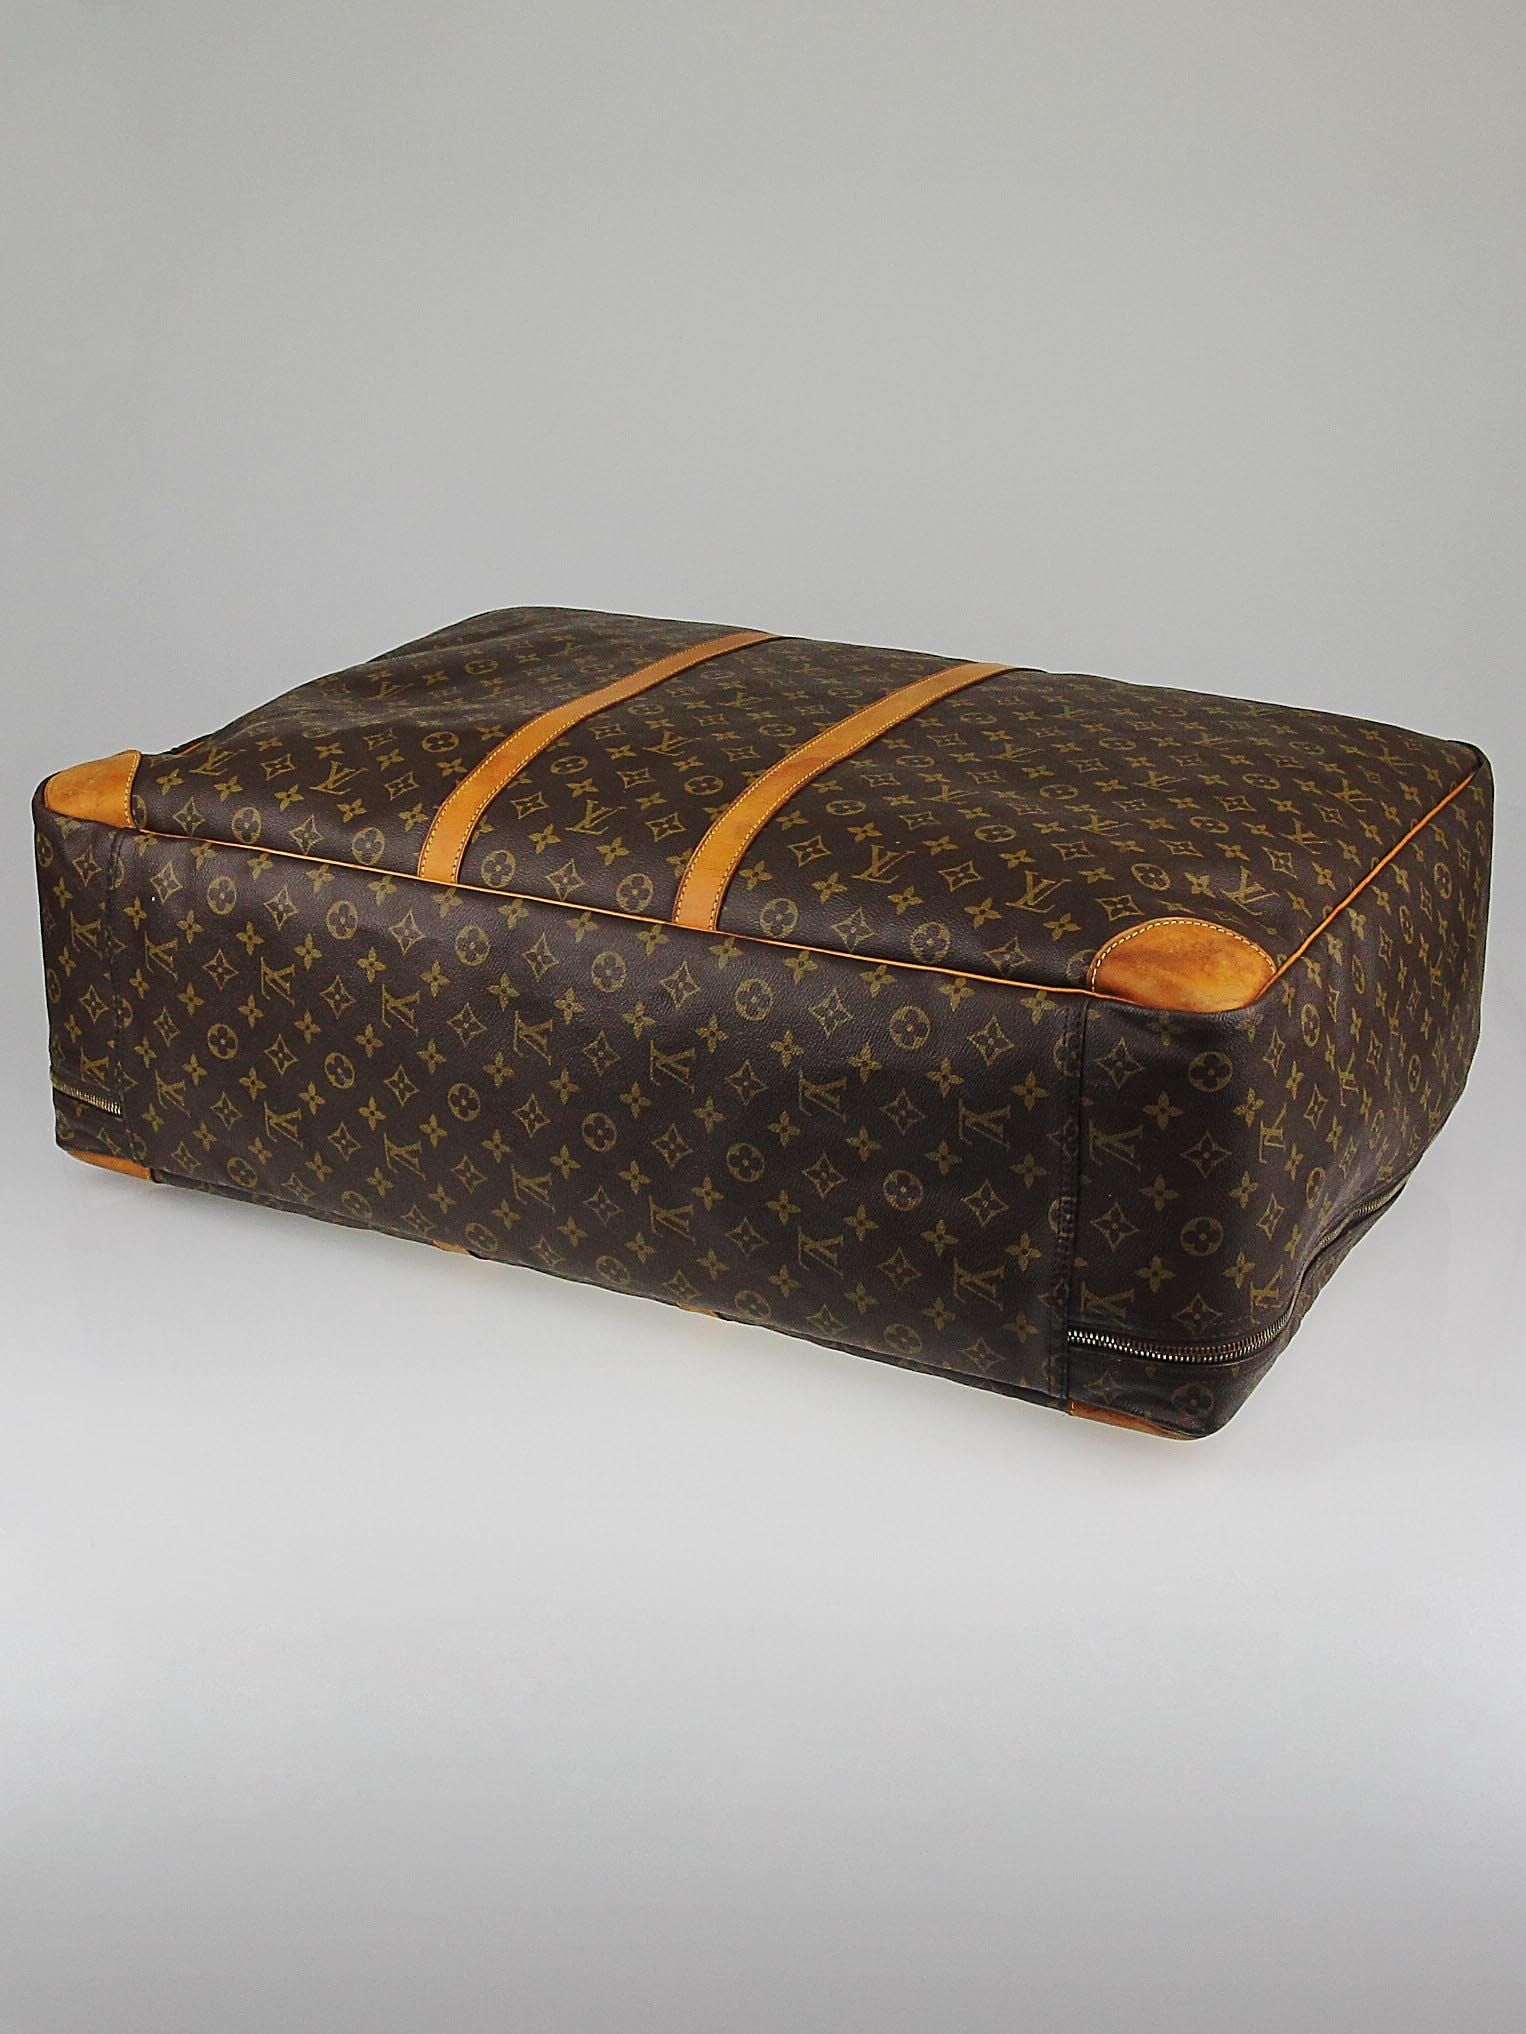 Louis+Vuitton+Rectangle+Luggage+Bag+Brown+Canvas for sale online